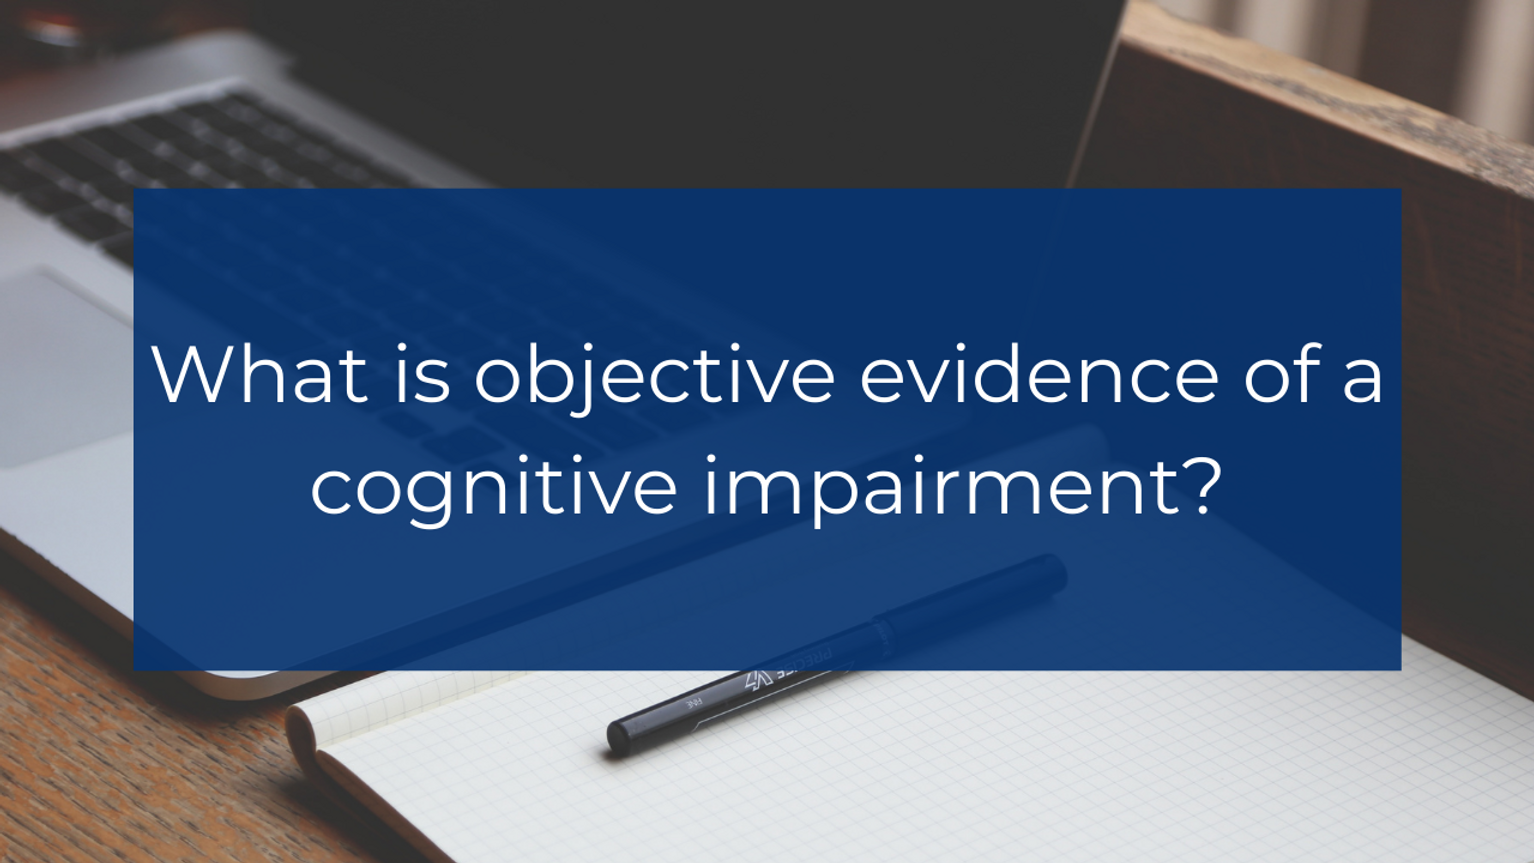 What is objective evidence of a cognitive impairment?